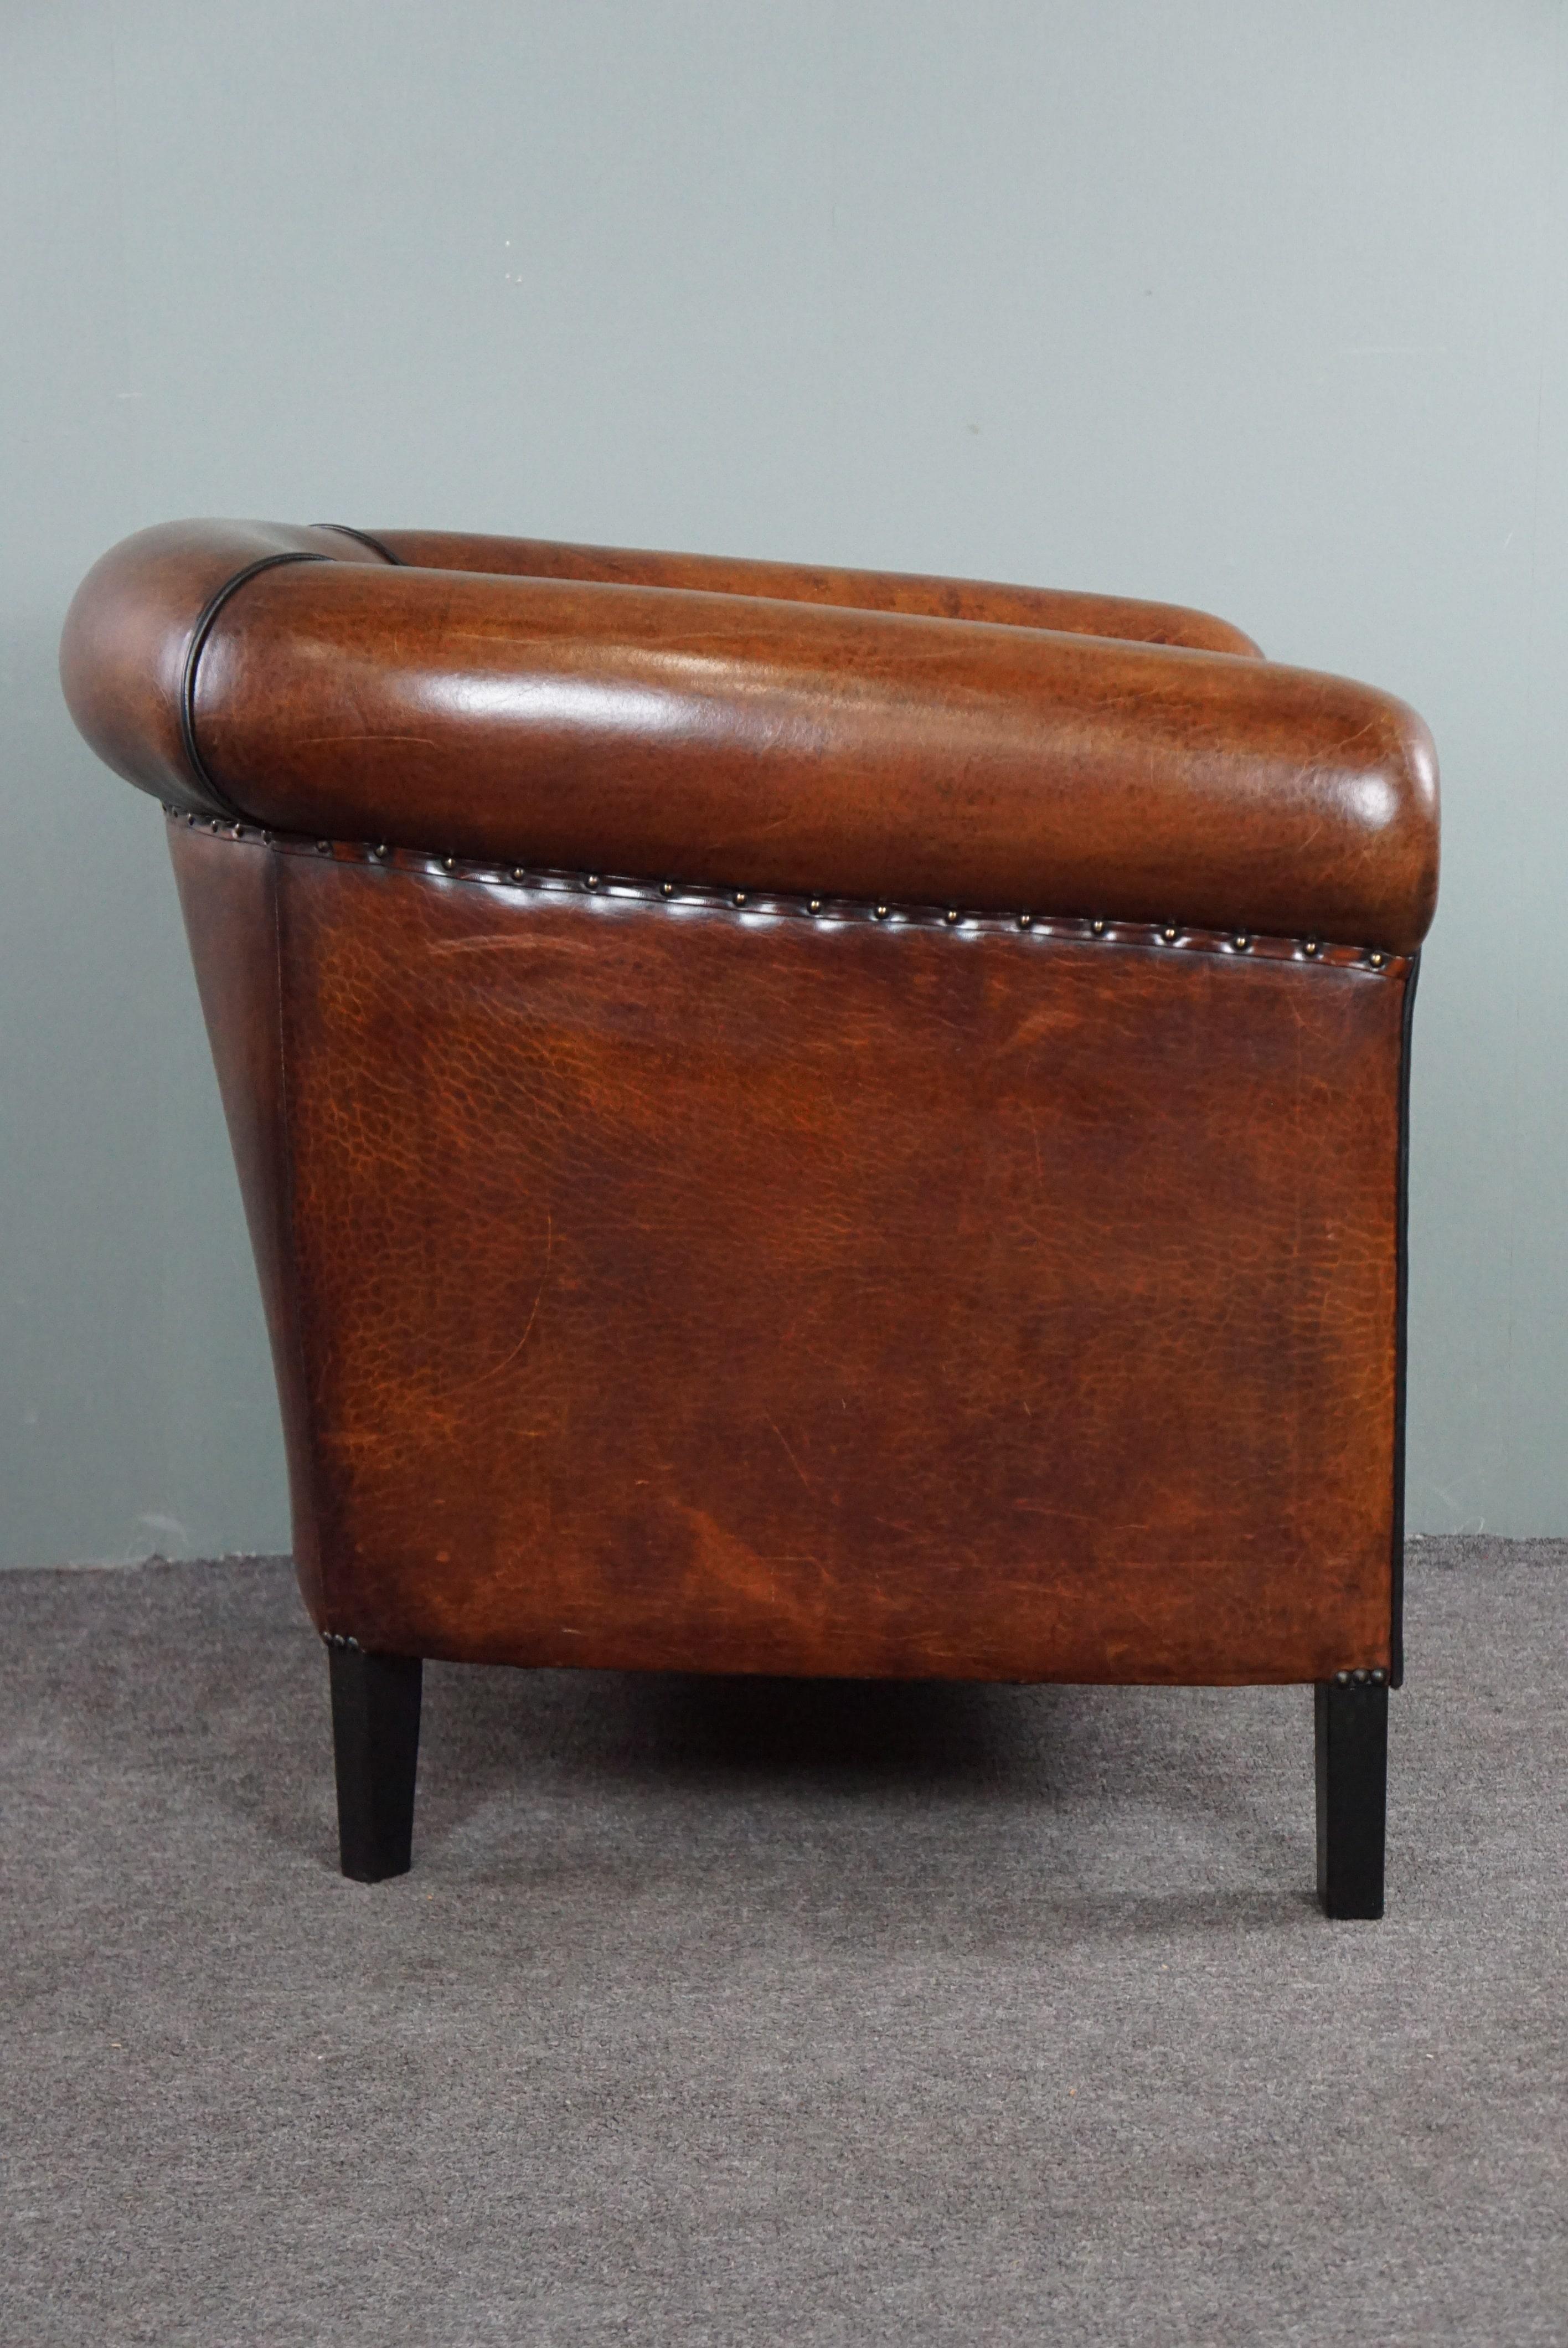 Dutch Sheep leather club chair with black piping and decorative nails